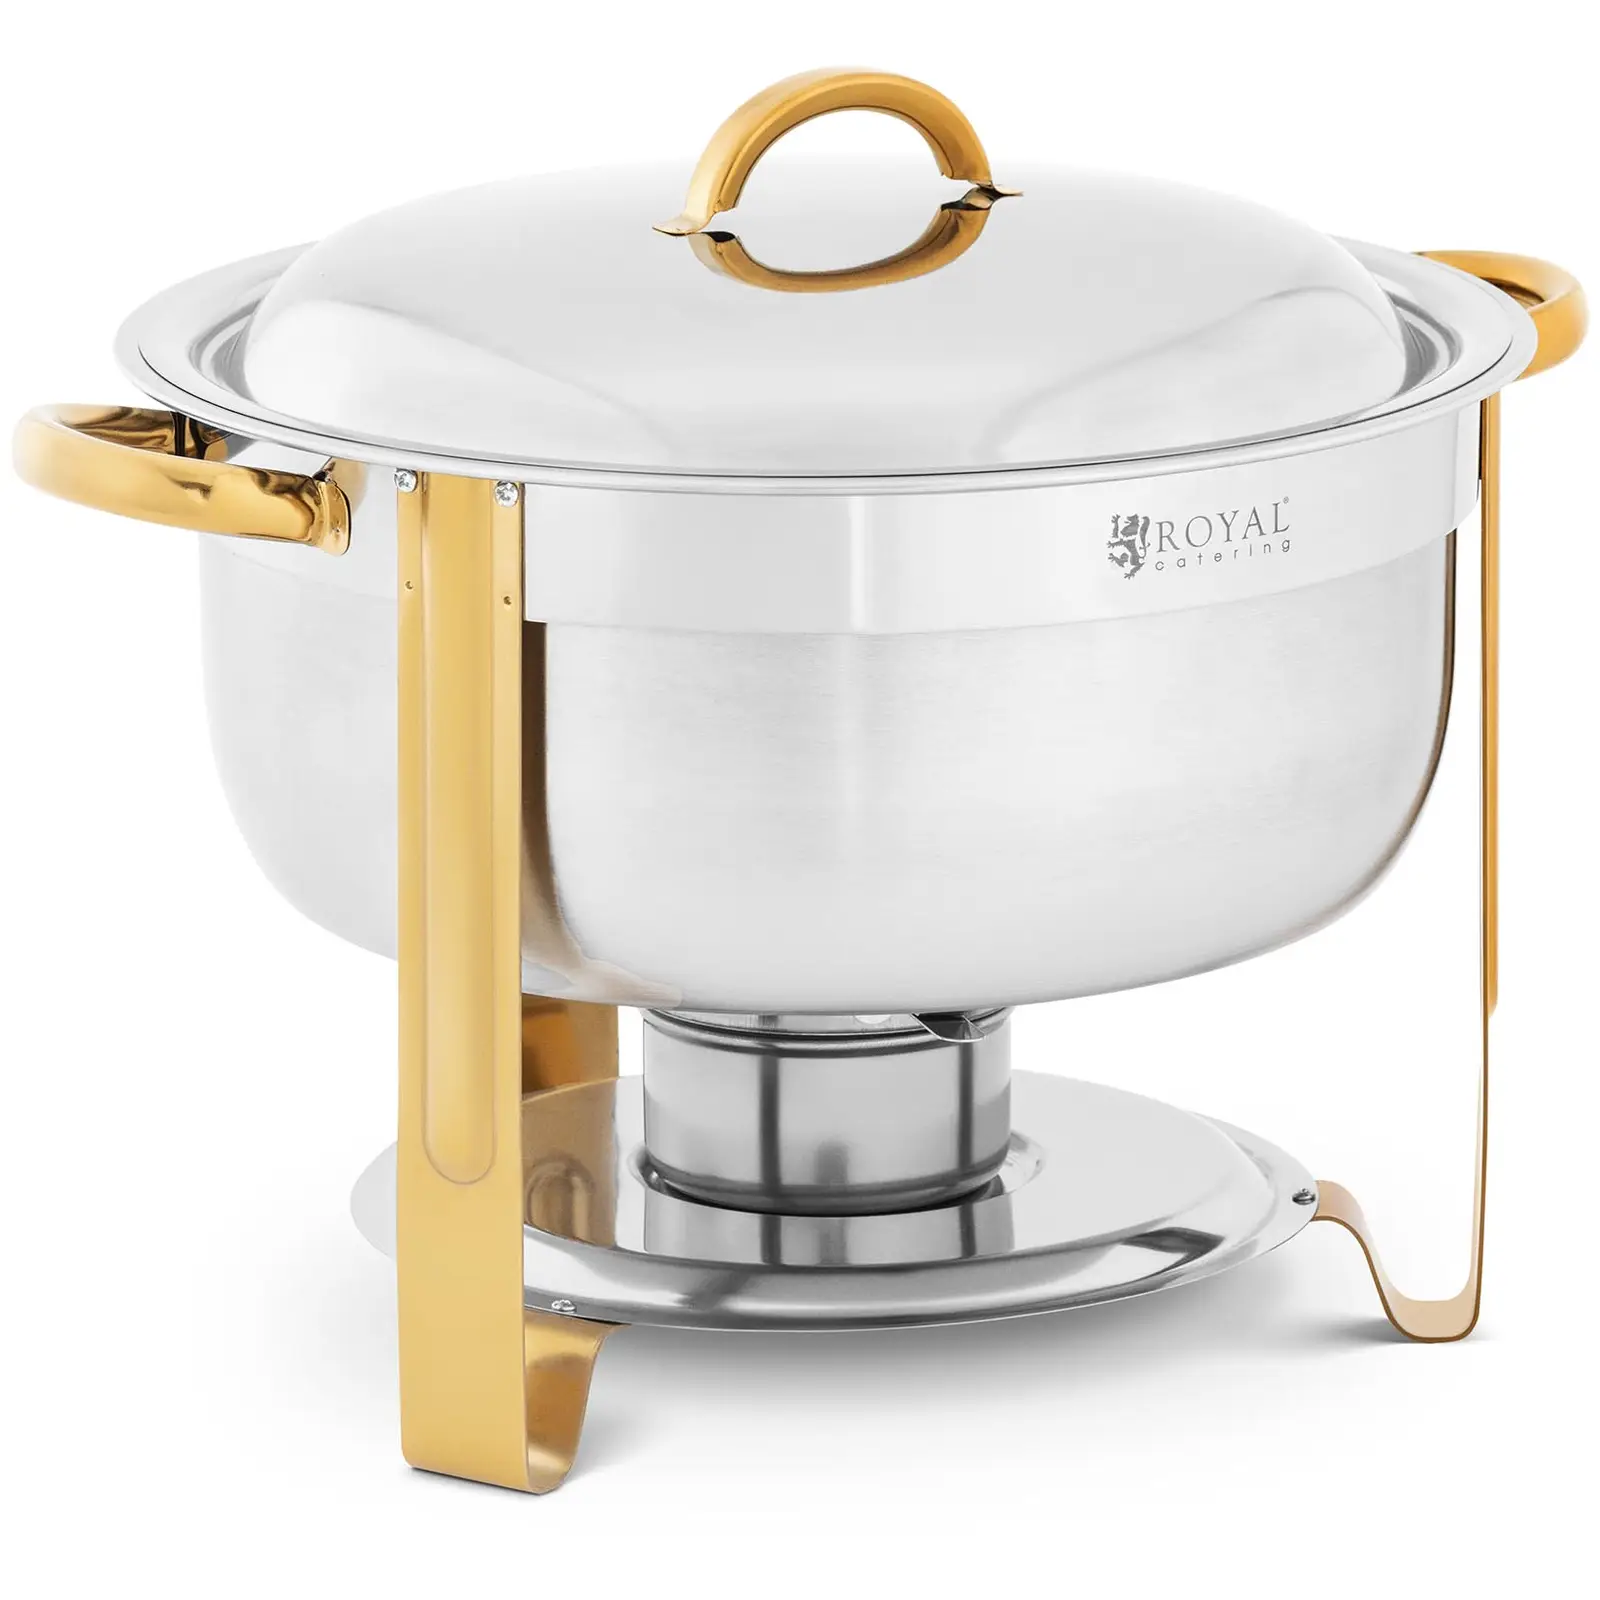 Chafing Dish - round - gold accents - 4.5 L - 1 Fuel cell - Royal Catering